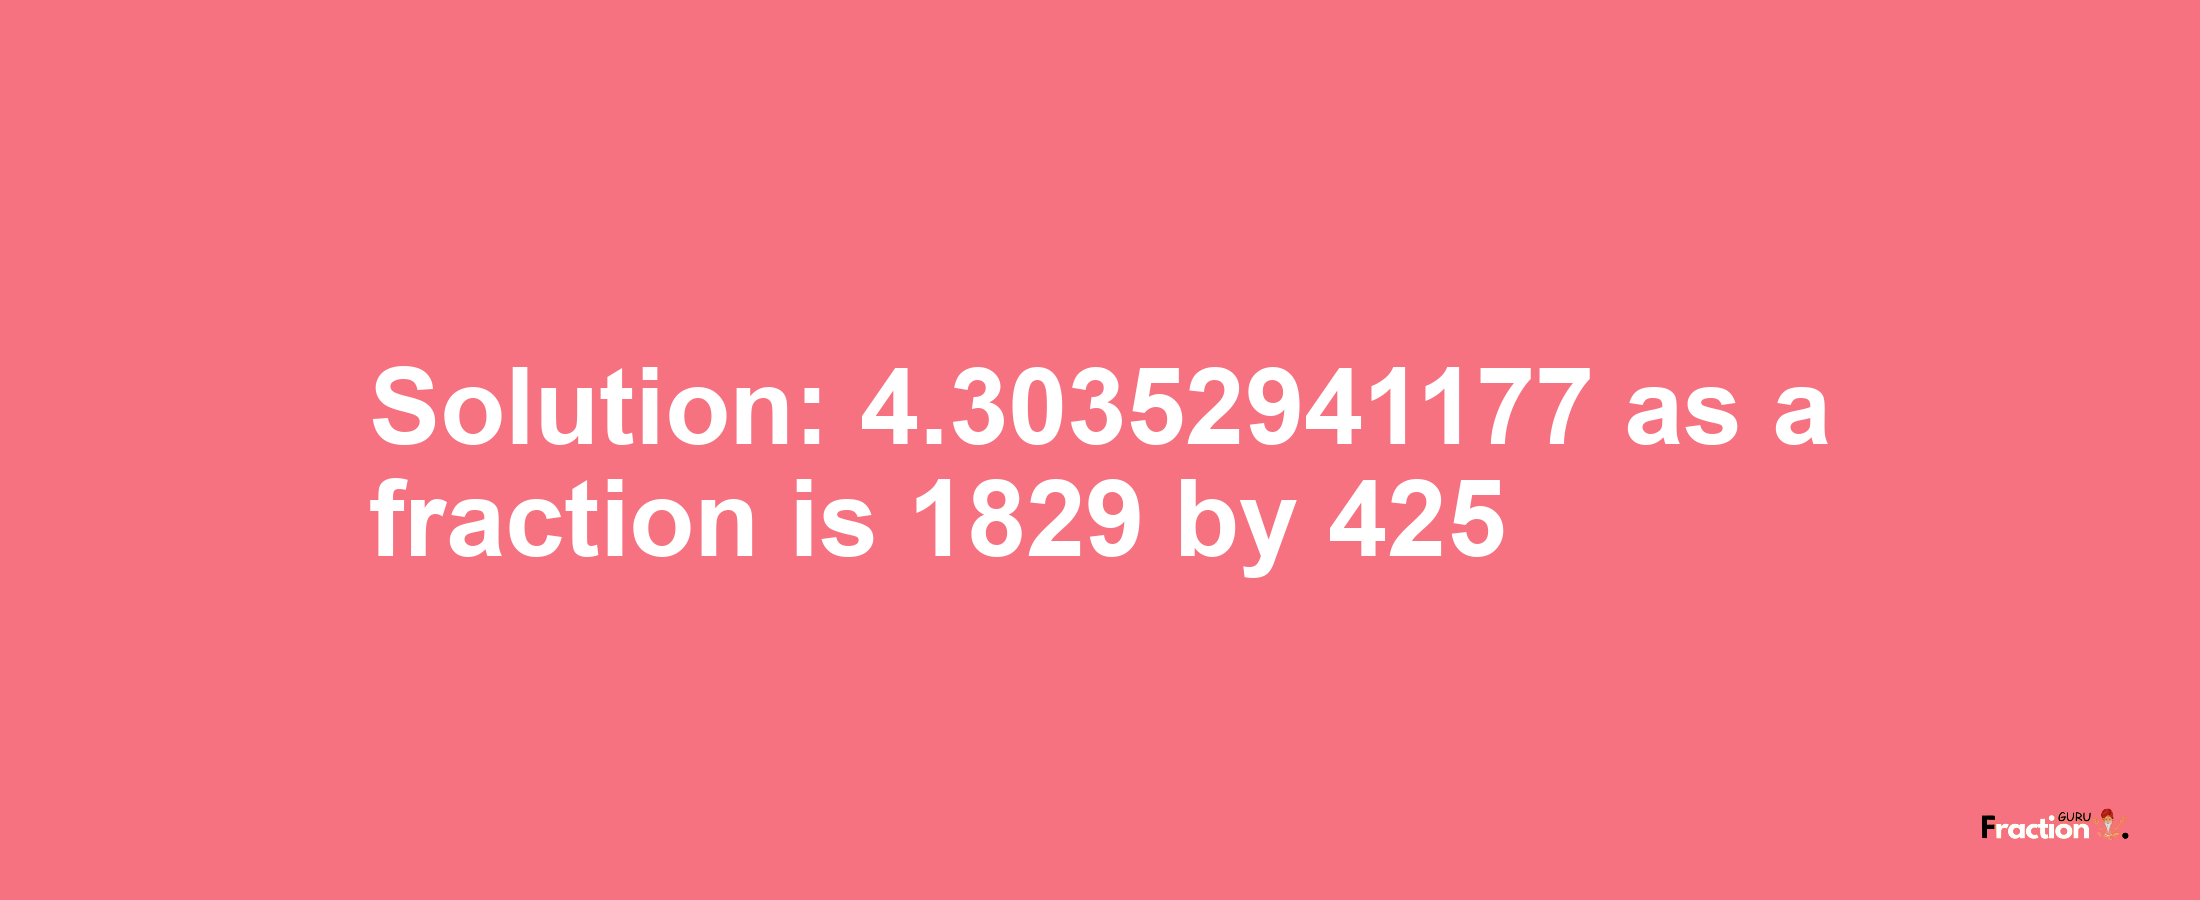 Solution:4.30352941177 as a fraction is 1829/425